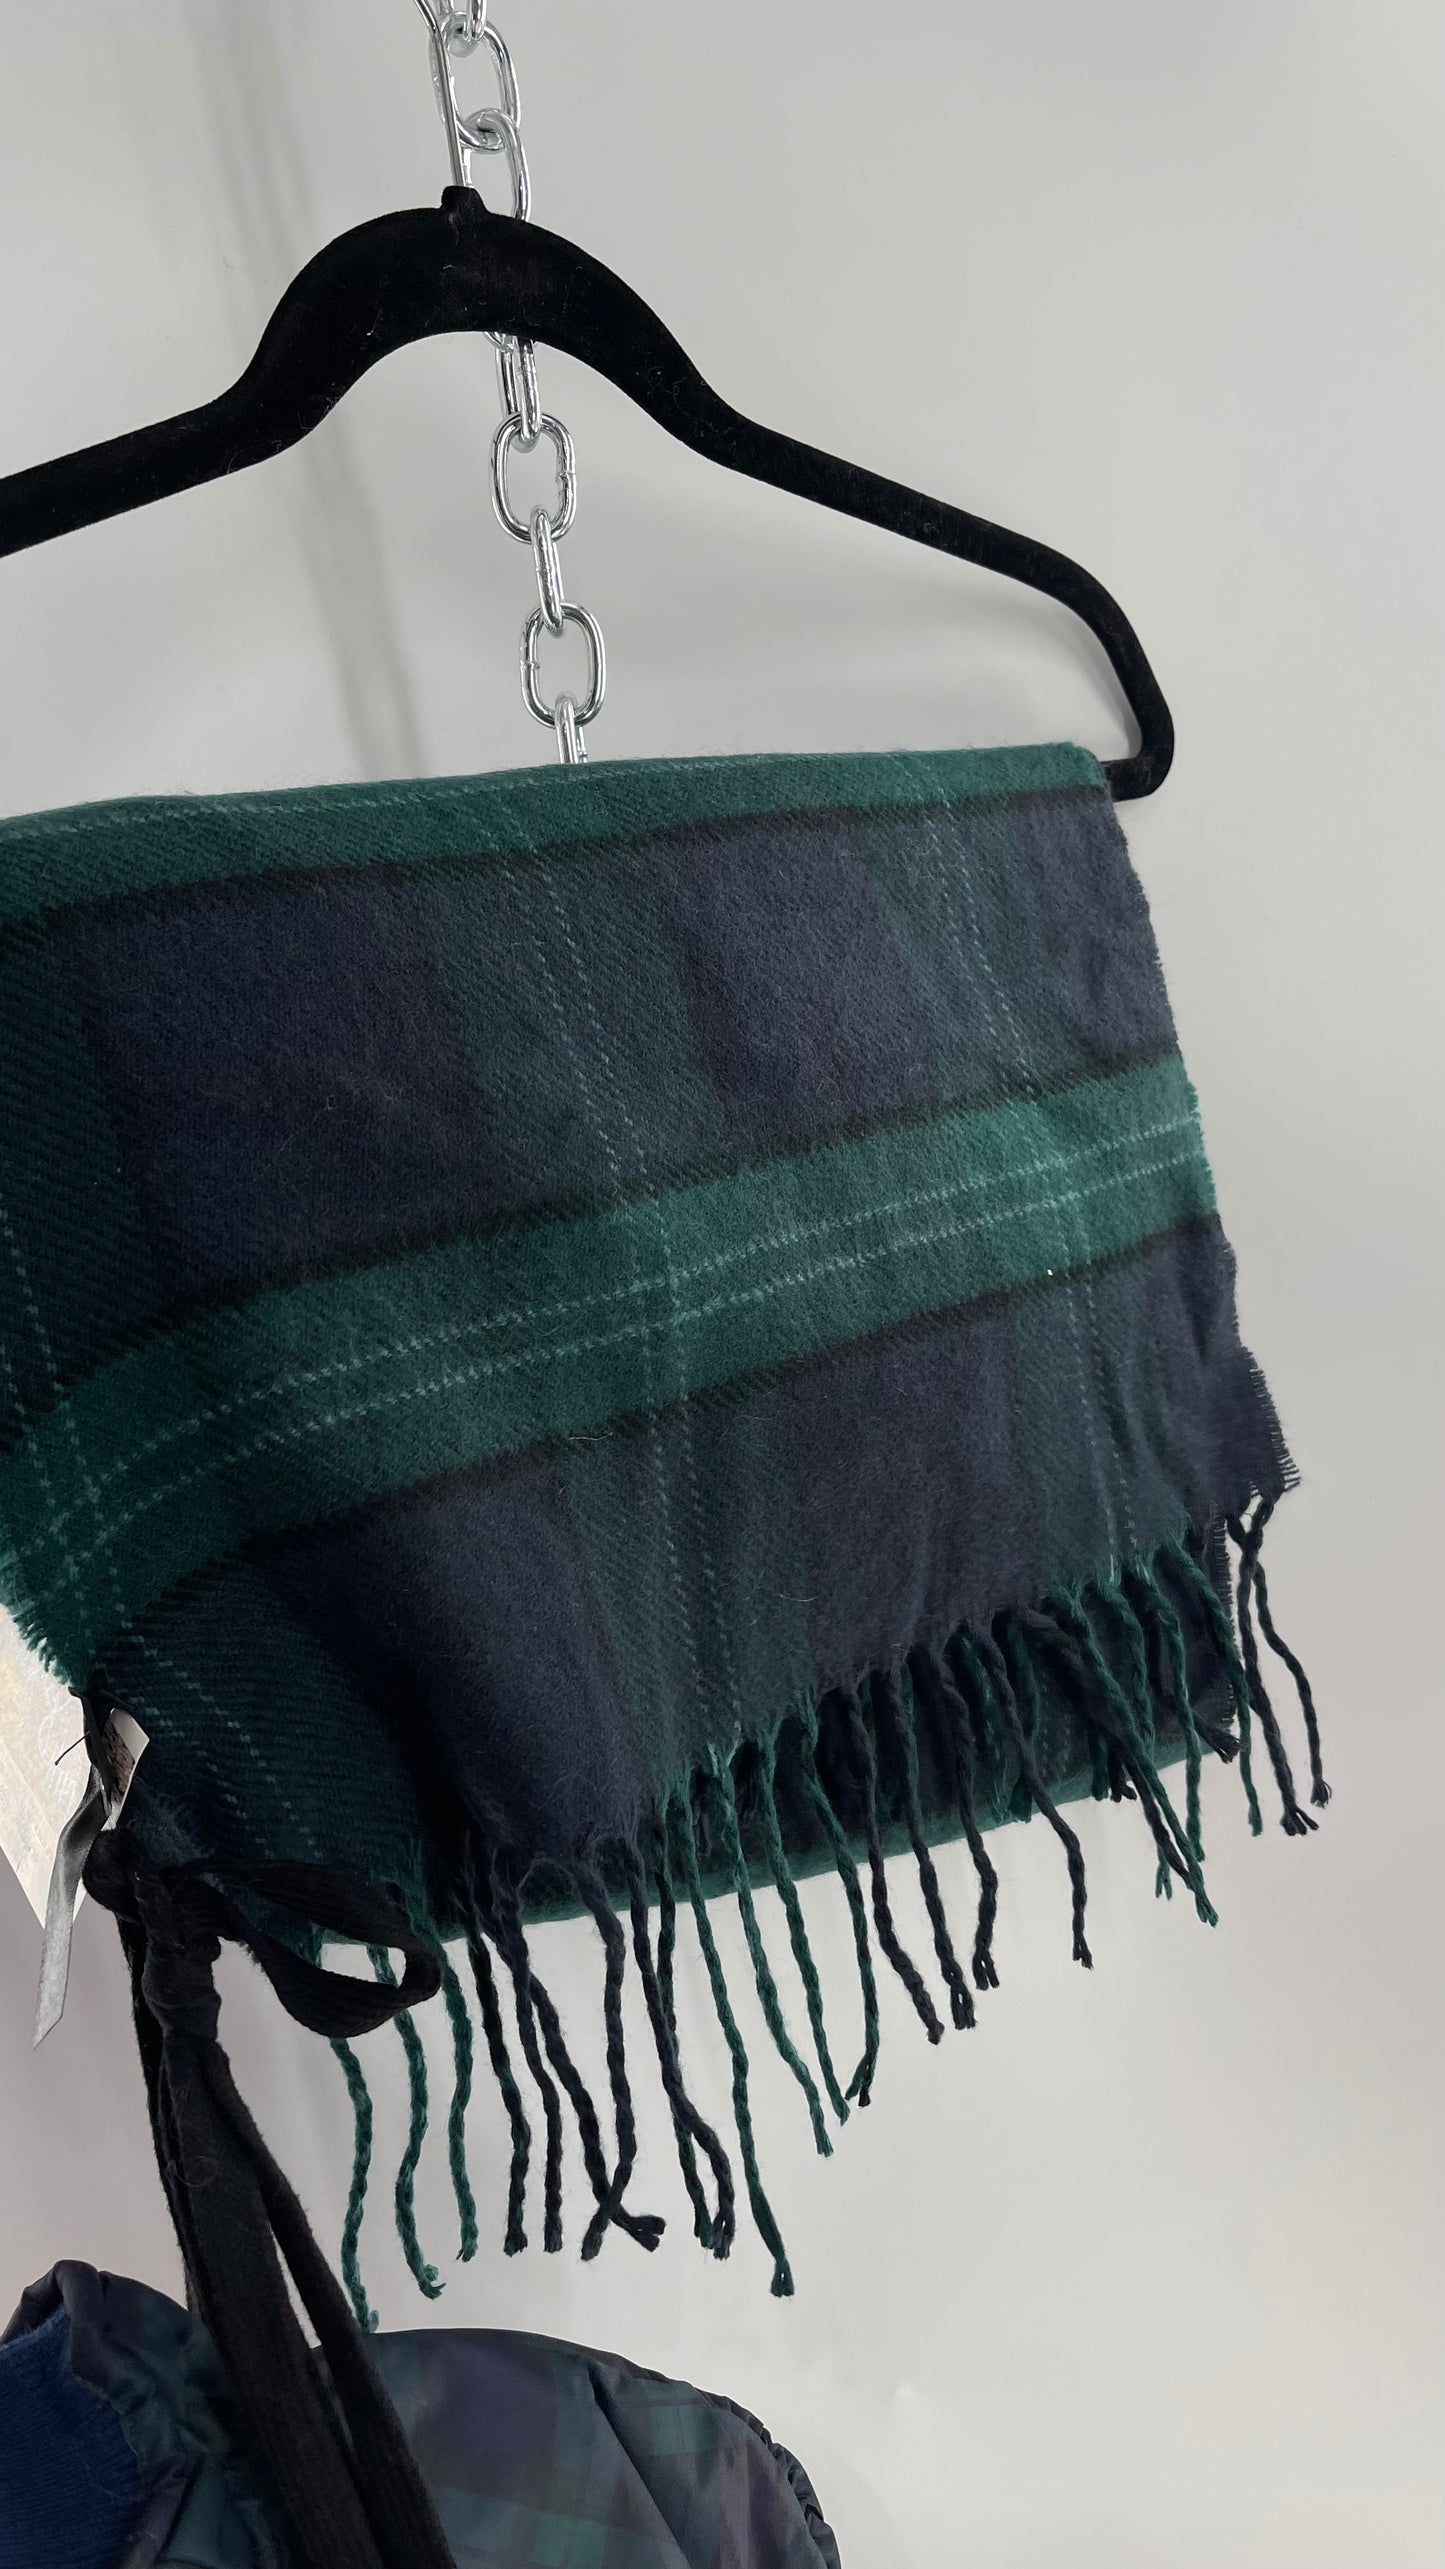 Urban Outfitters Plaid Navy Green Scarf and Matching Glove Set